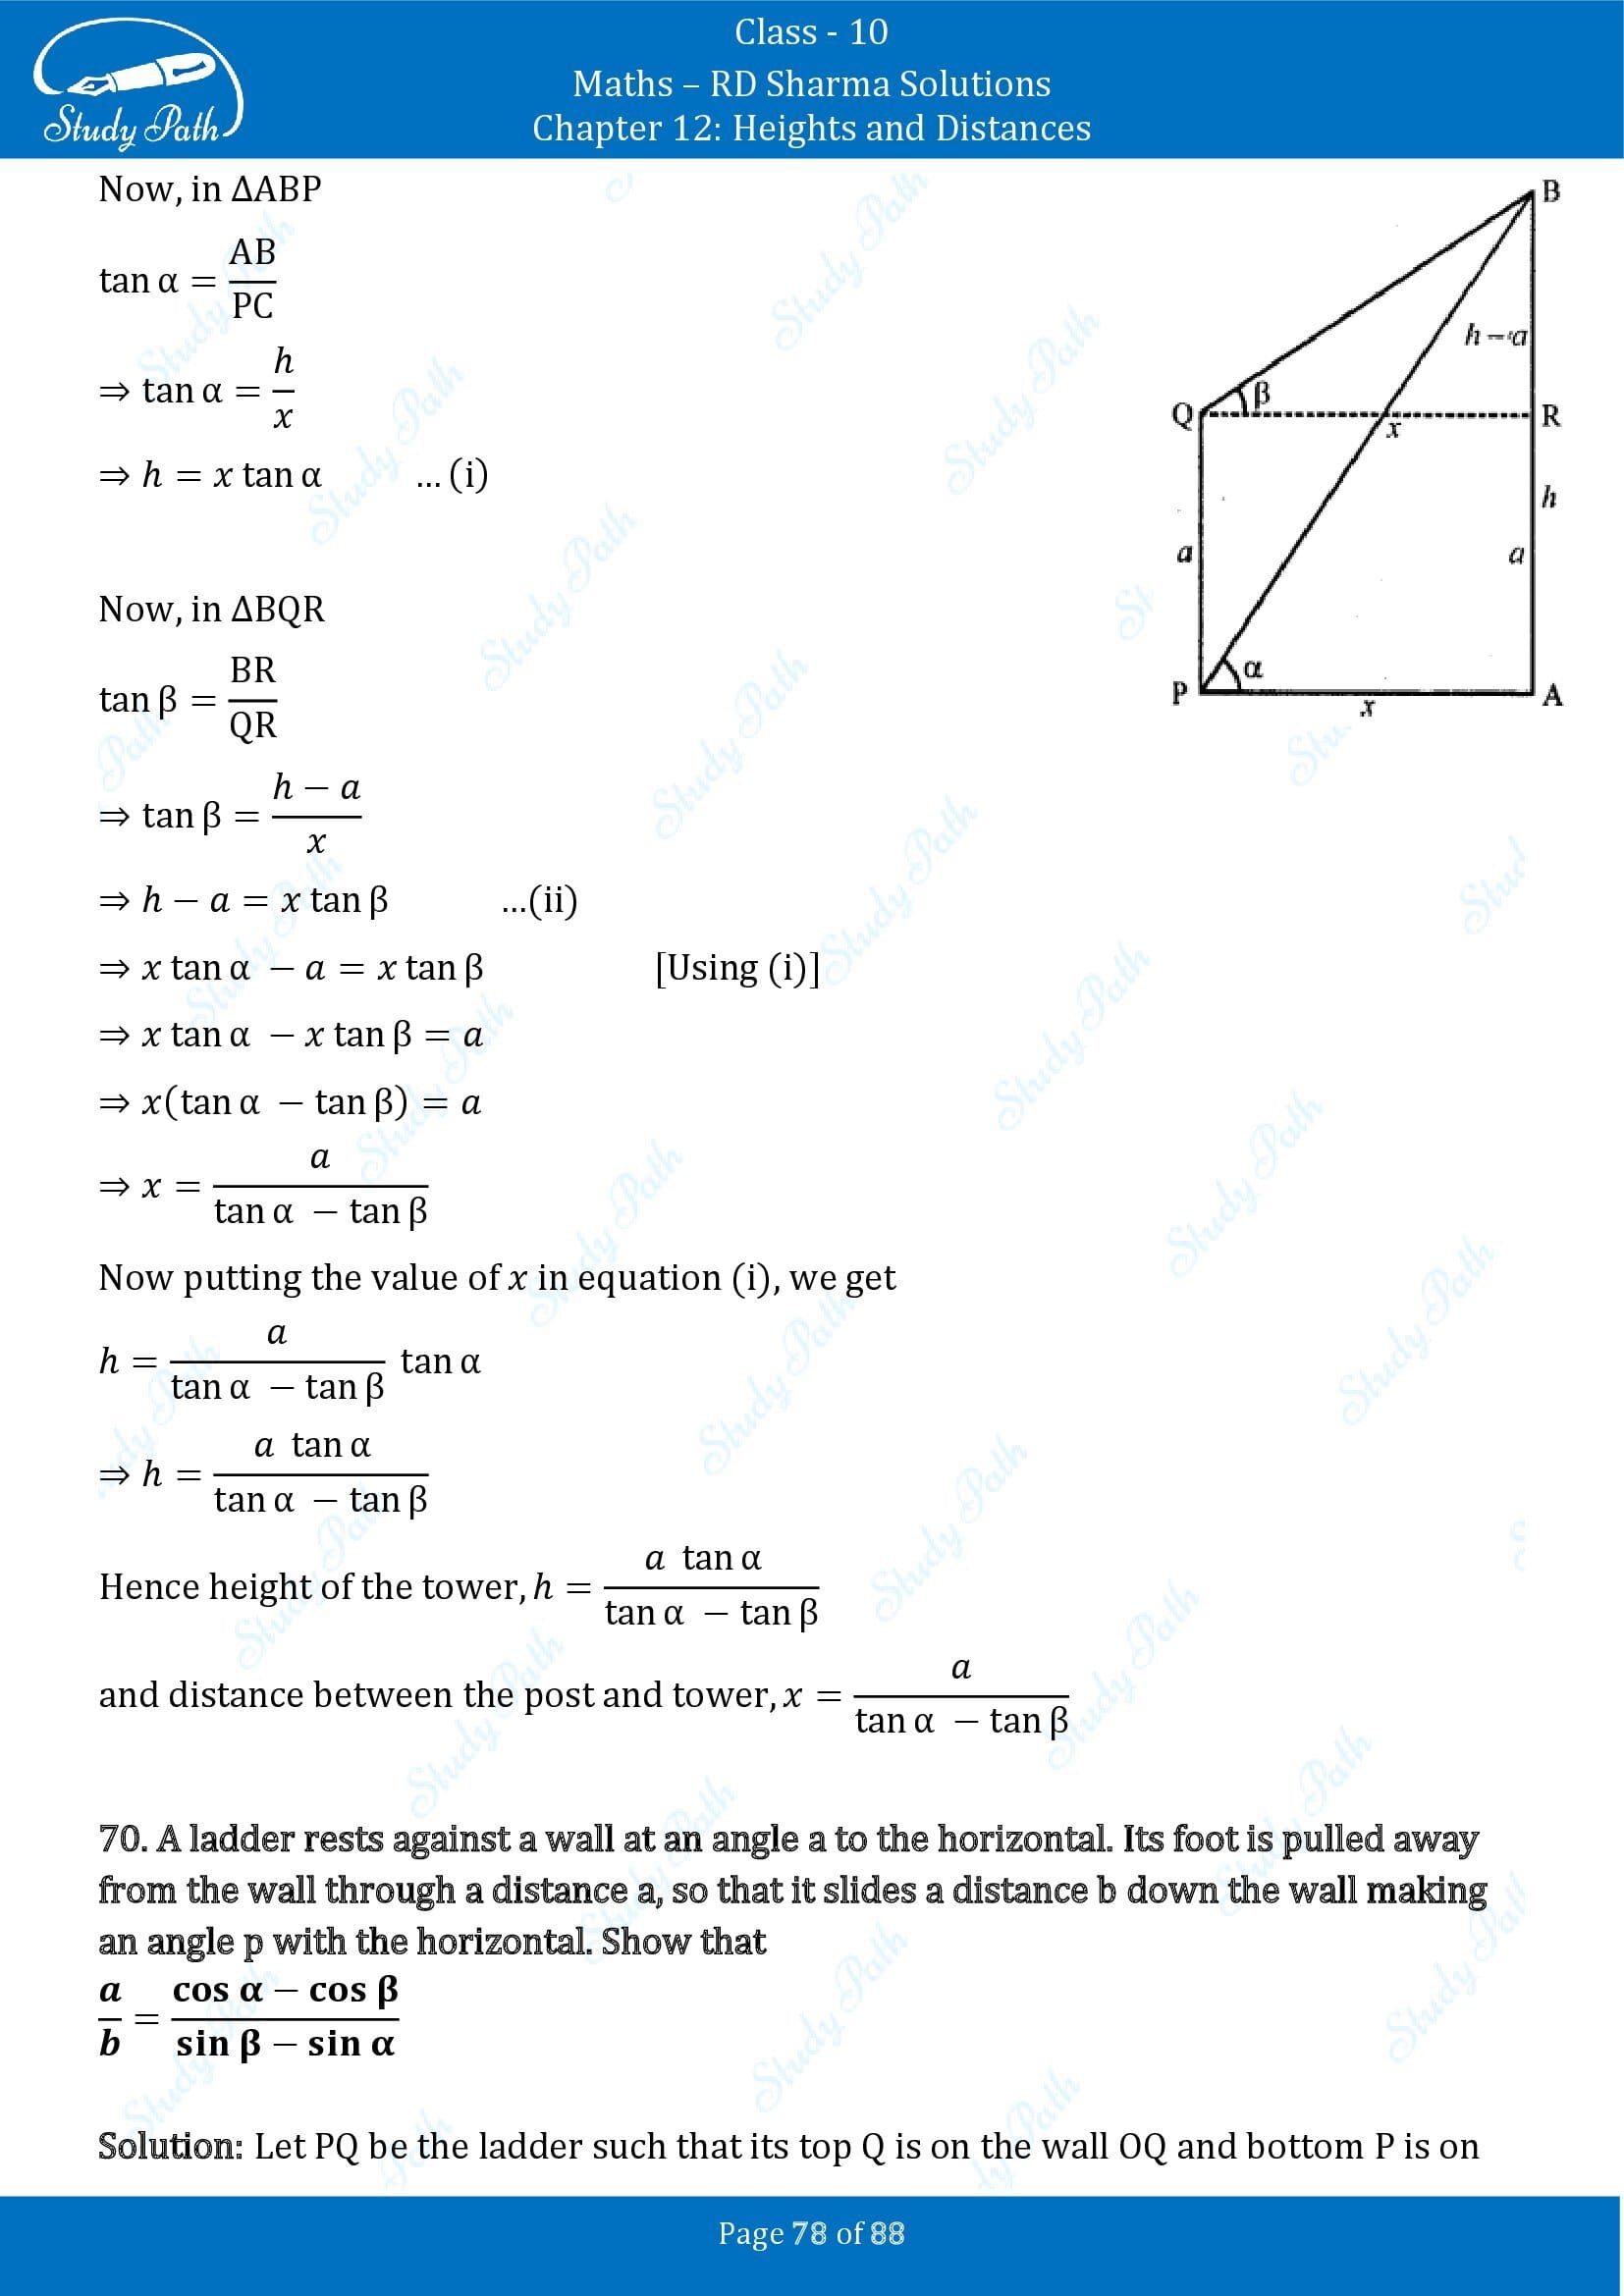 RD Sharma Solutions Class 10 Chapter 12 Heights and Distances Exercise 12.1 00078